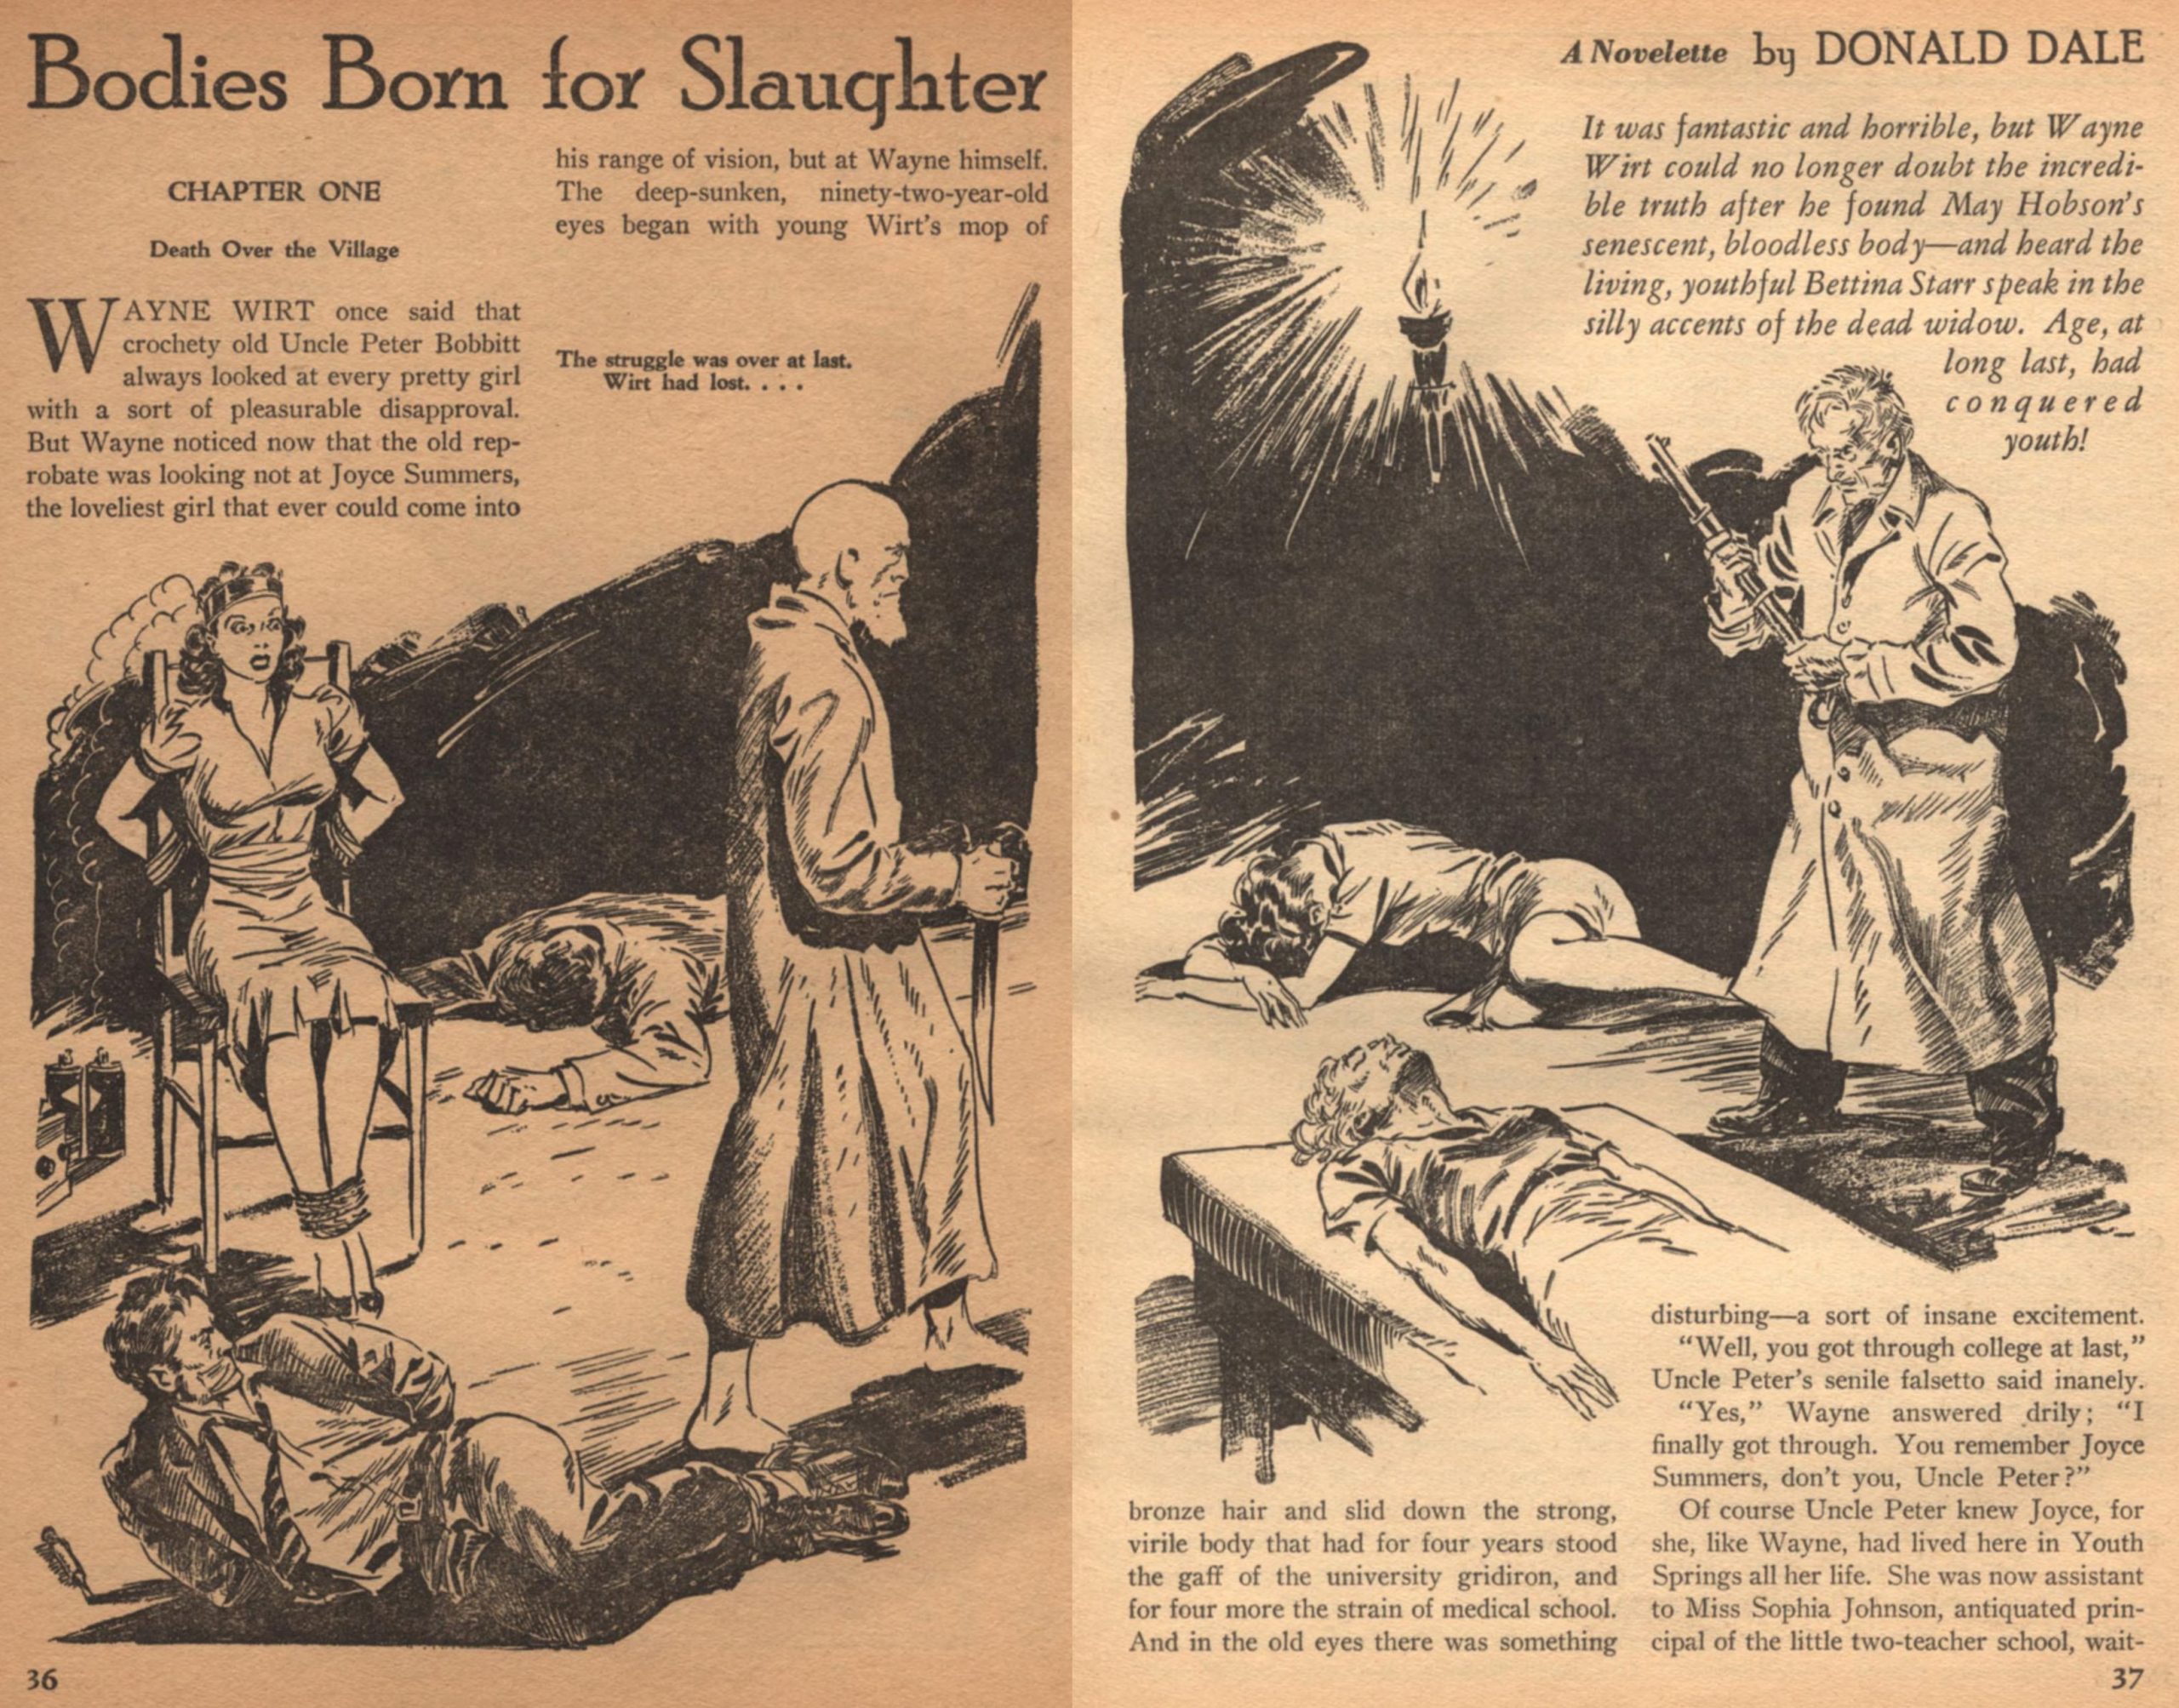 Art and beginning of Mary Dale Buckner's story "Bodies Born for Slaughter" in Terror Tales, Septembe 1940.